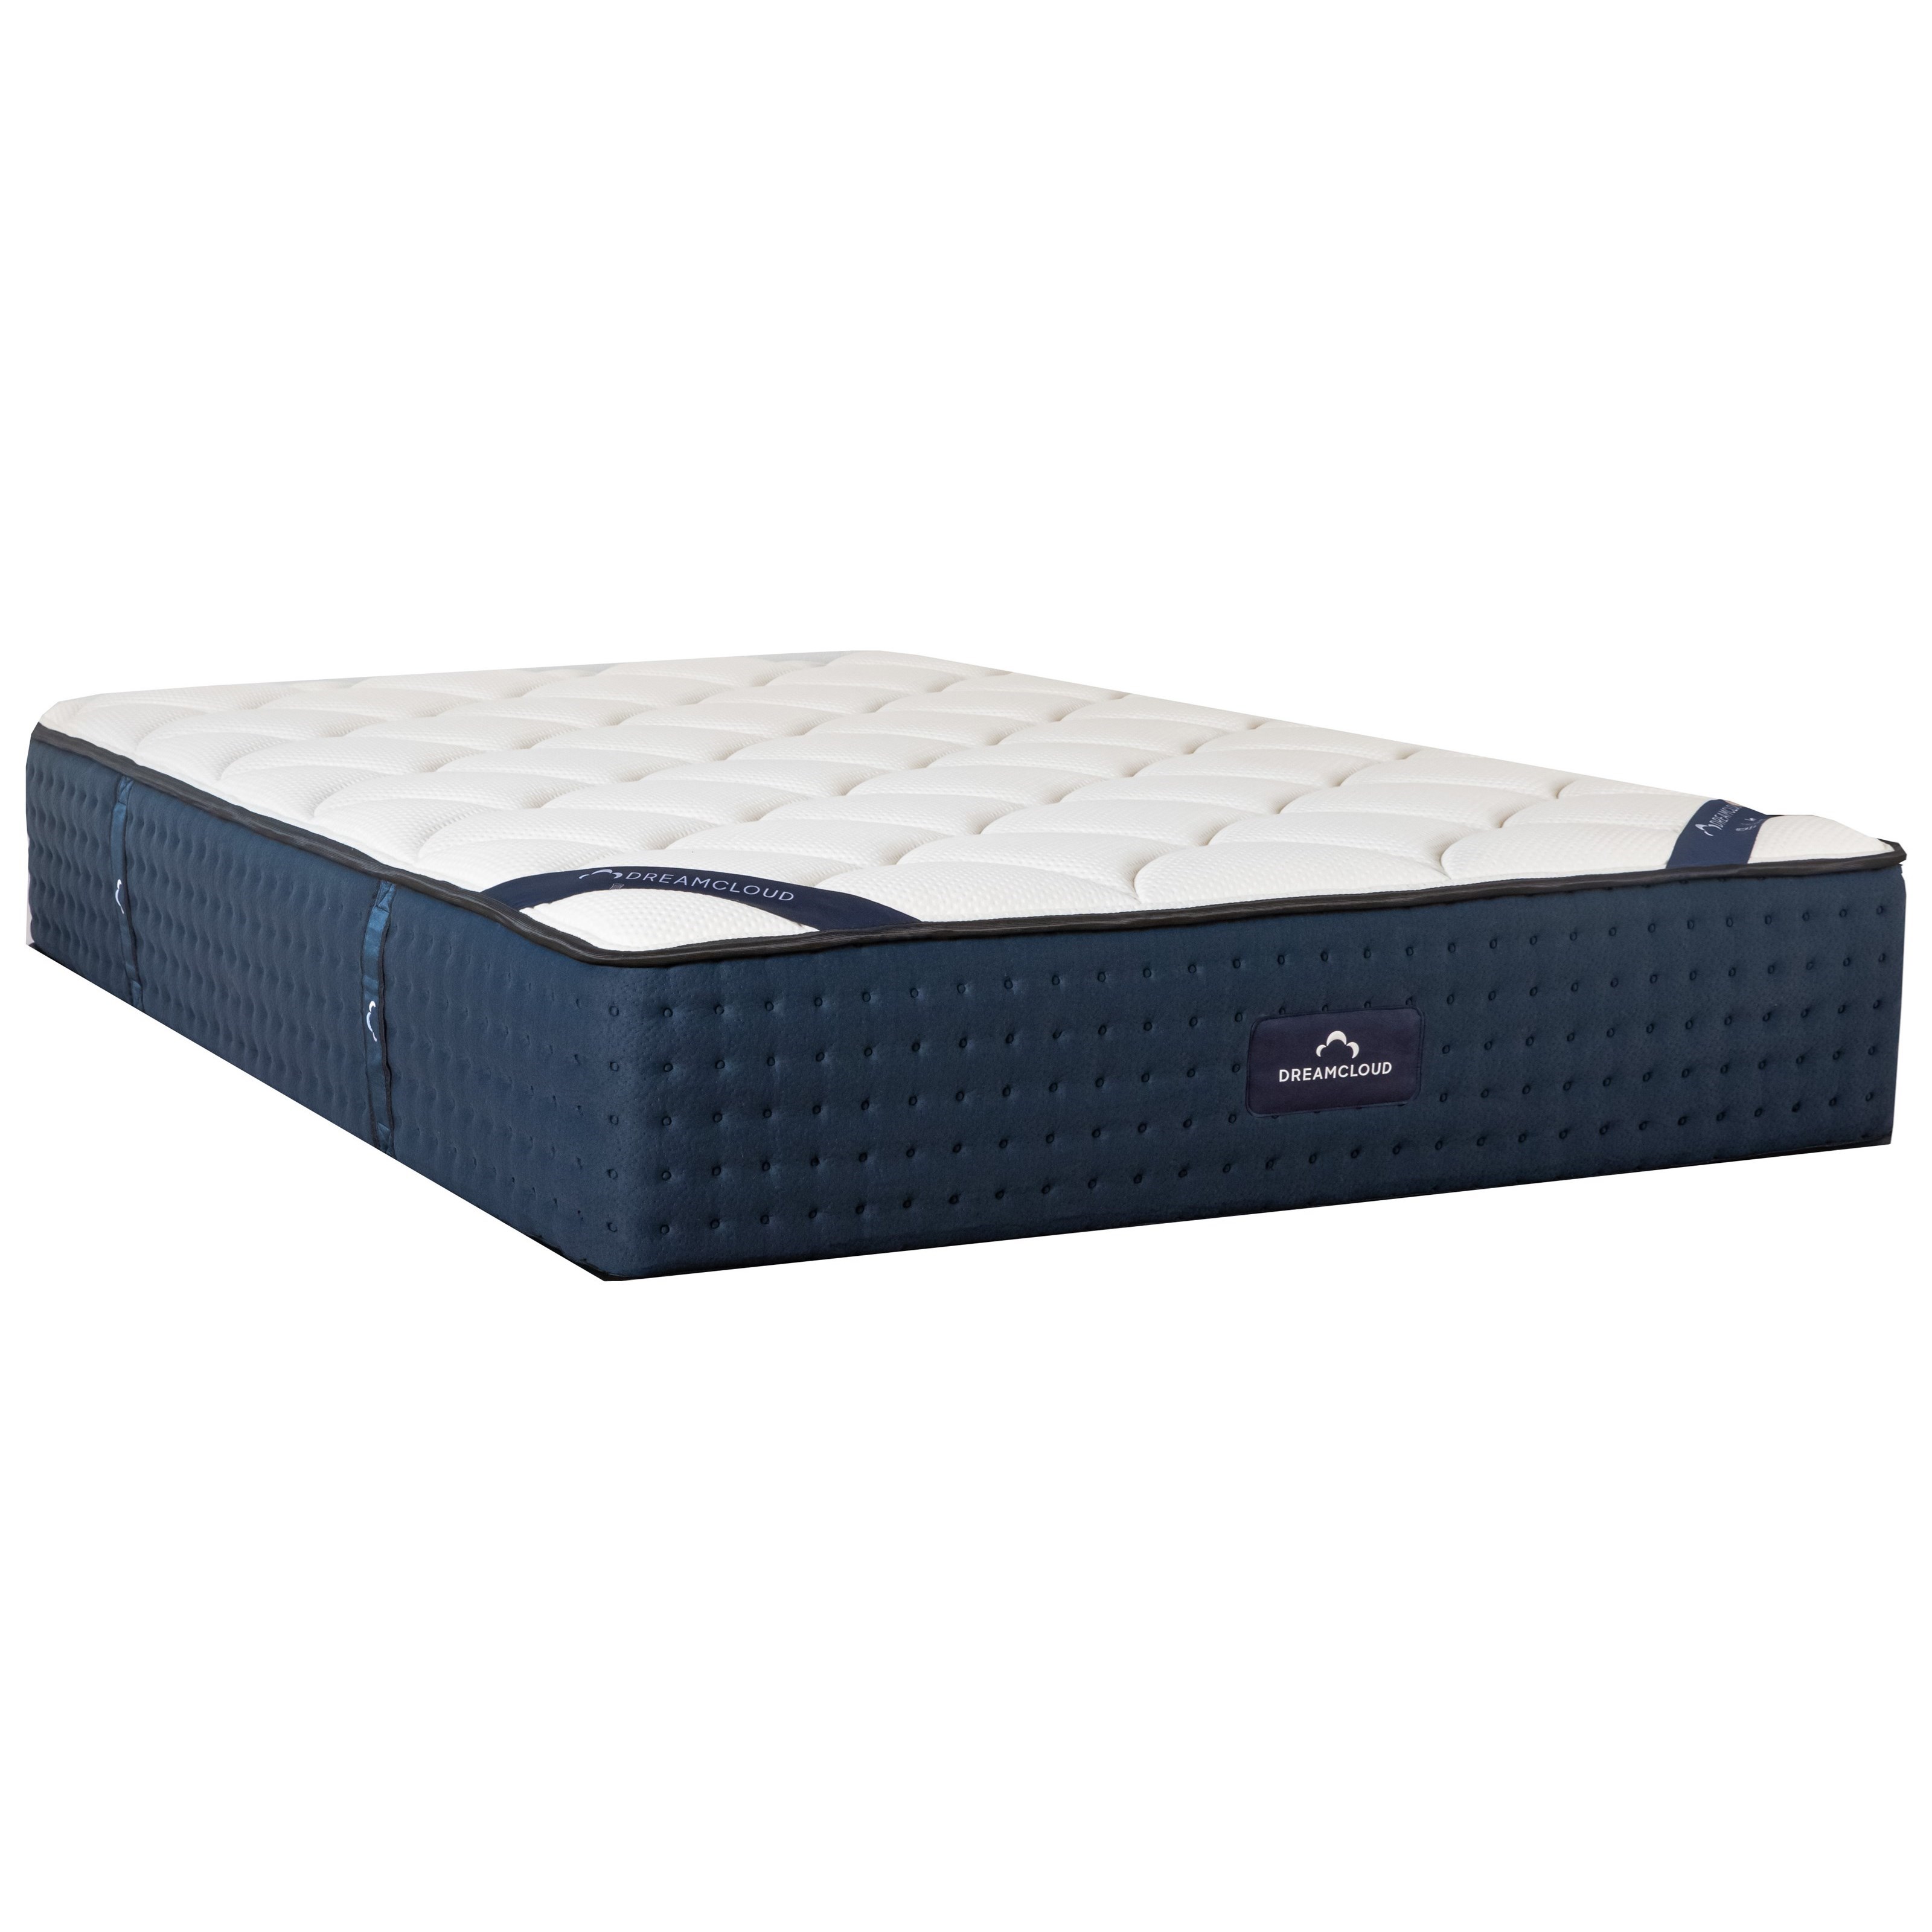 Where Can I Try Dreamcloud Mattresses?